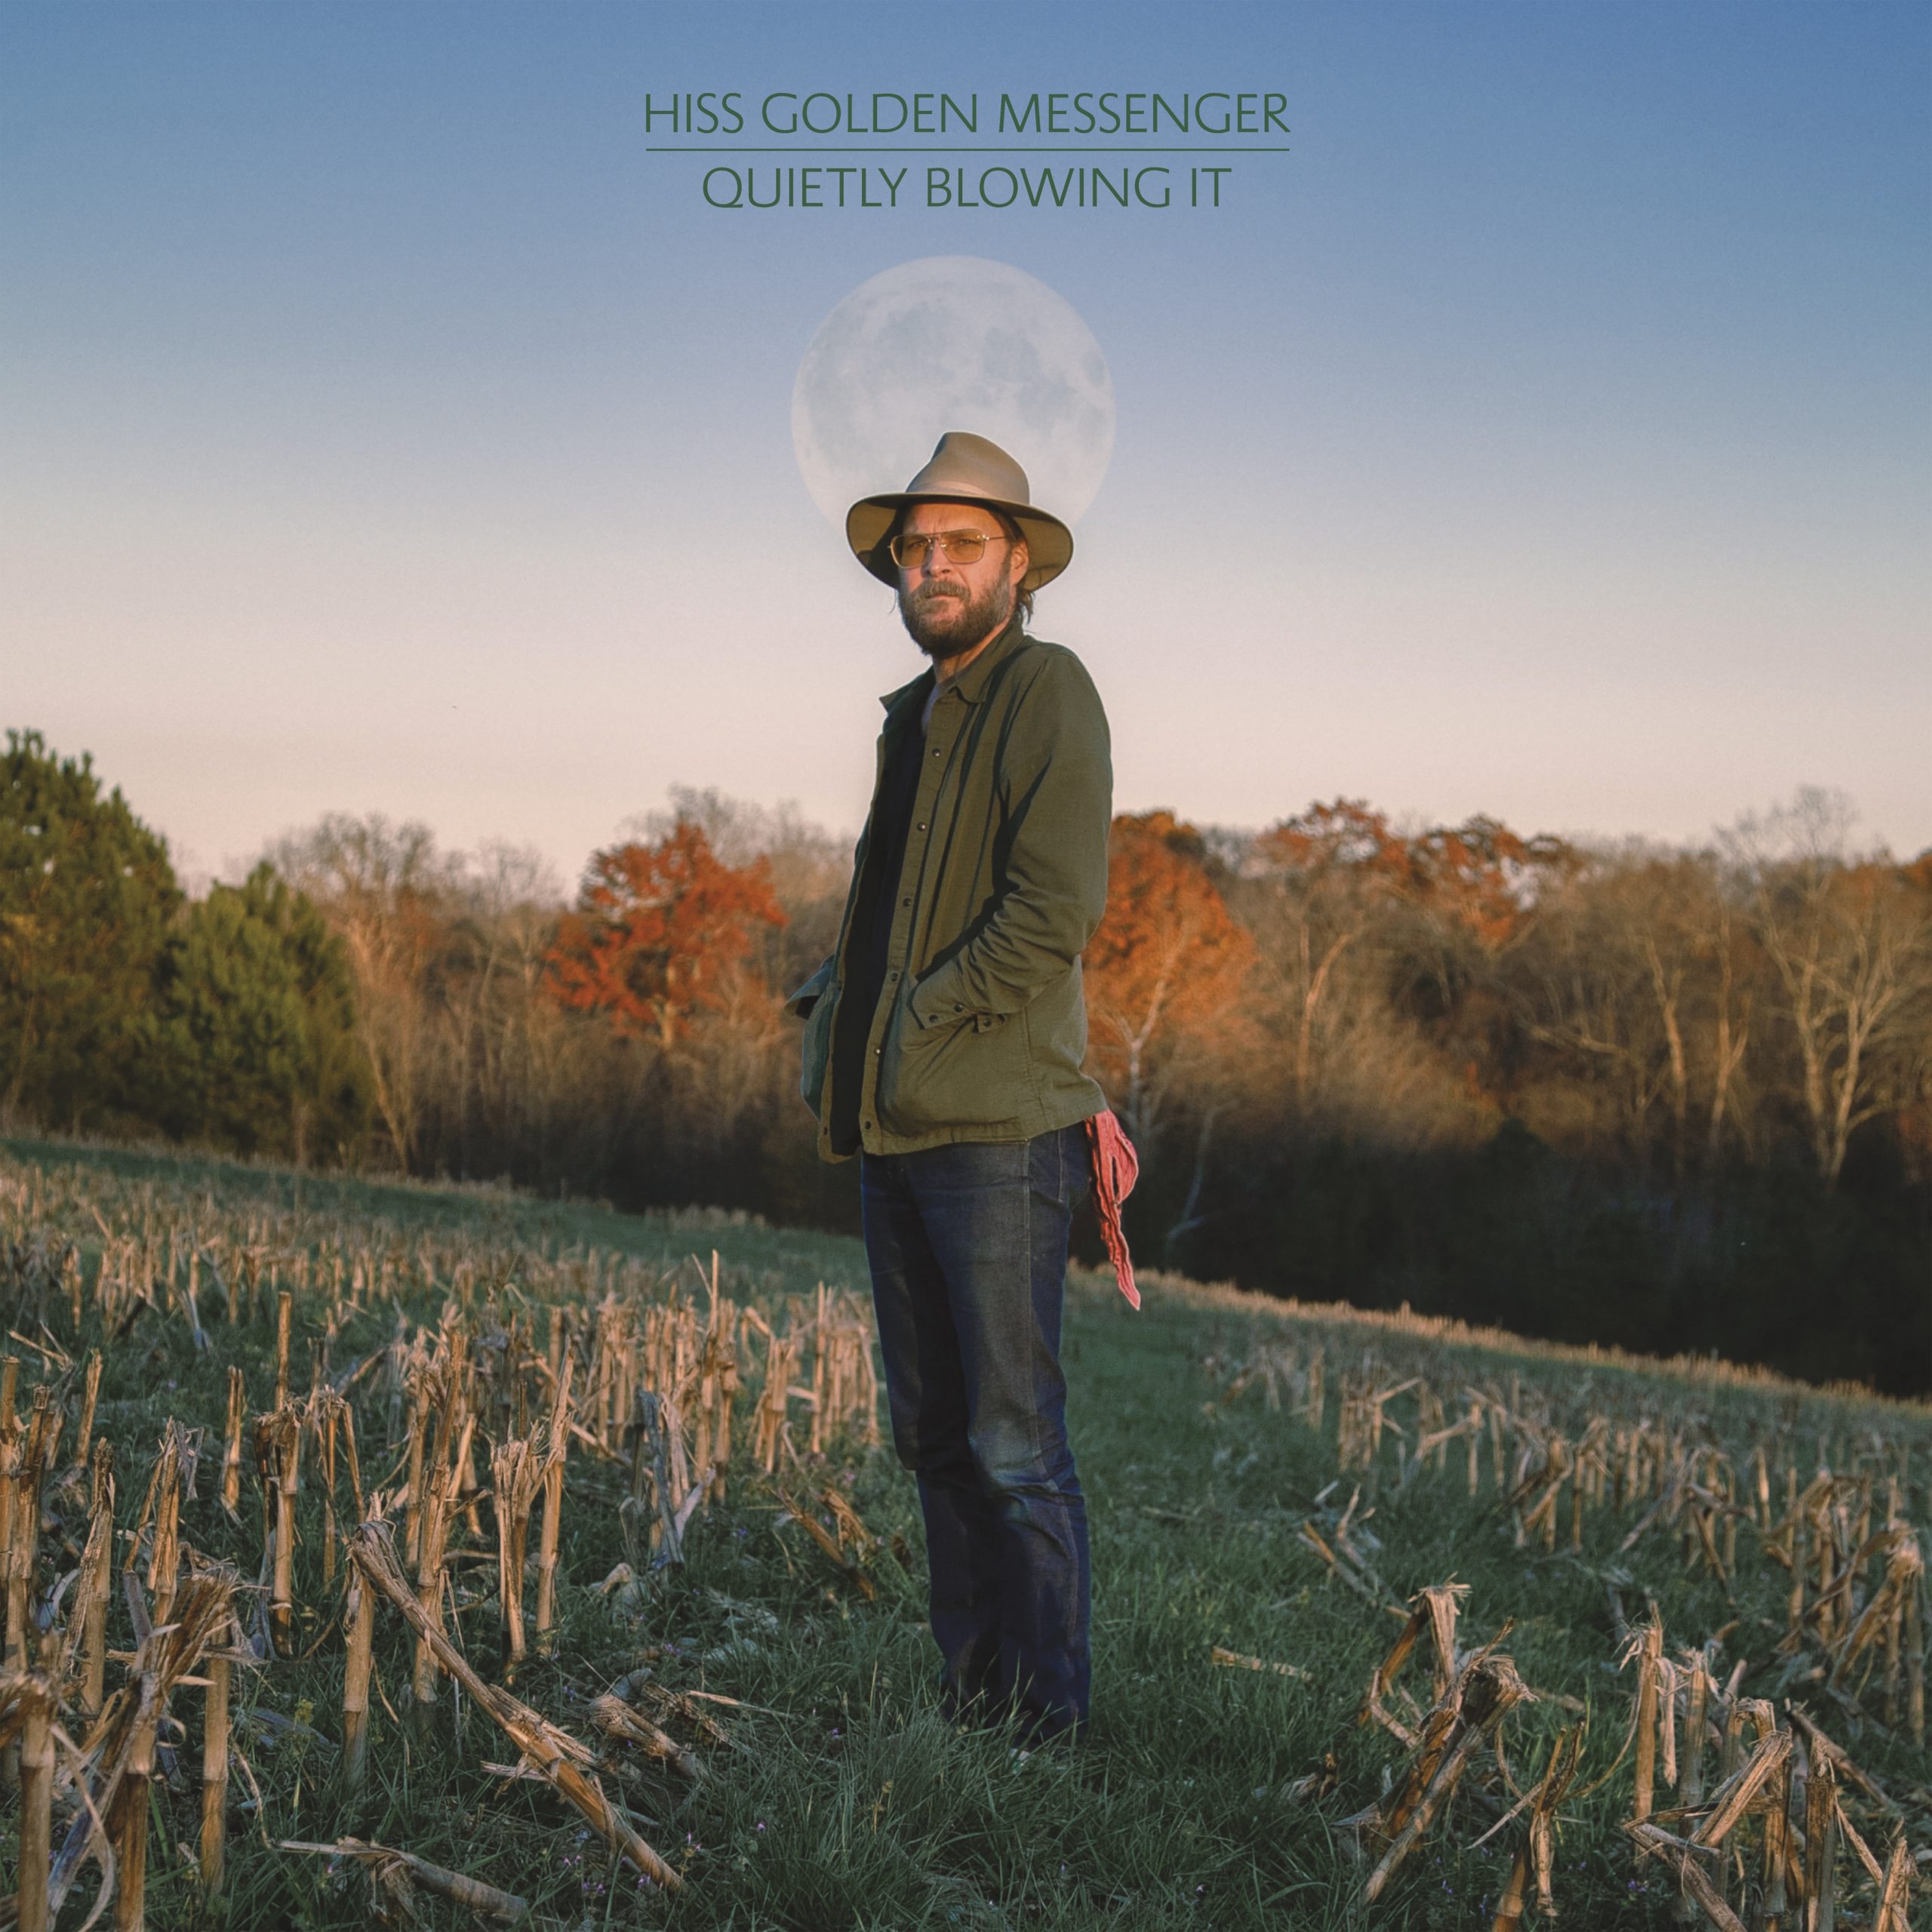 HISS GOLDEN MESSENGER RELEASES NEW SONG AND ANNOUNCES EXTENSIVE TOUR